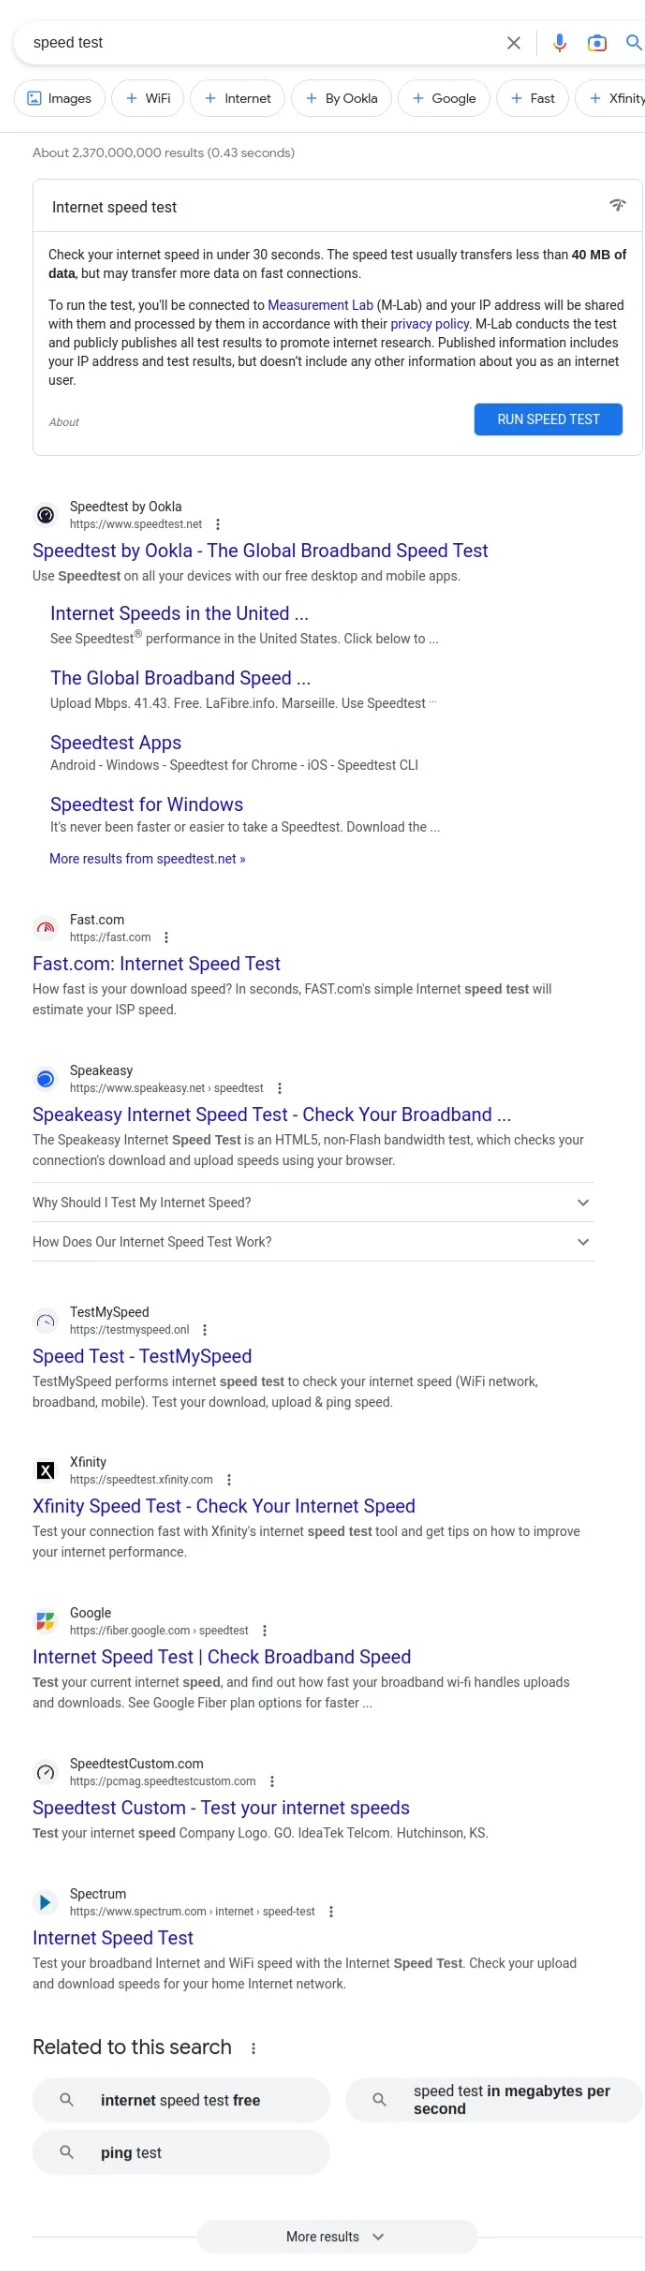 Google's result page when searching for speed test (March 27)